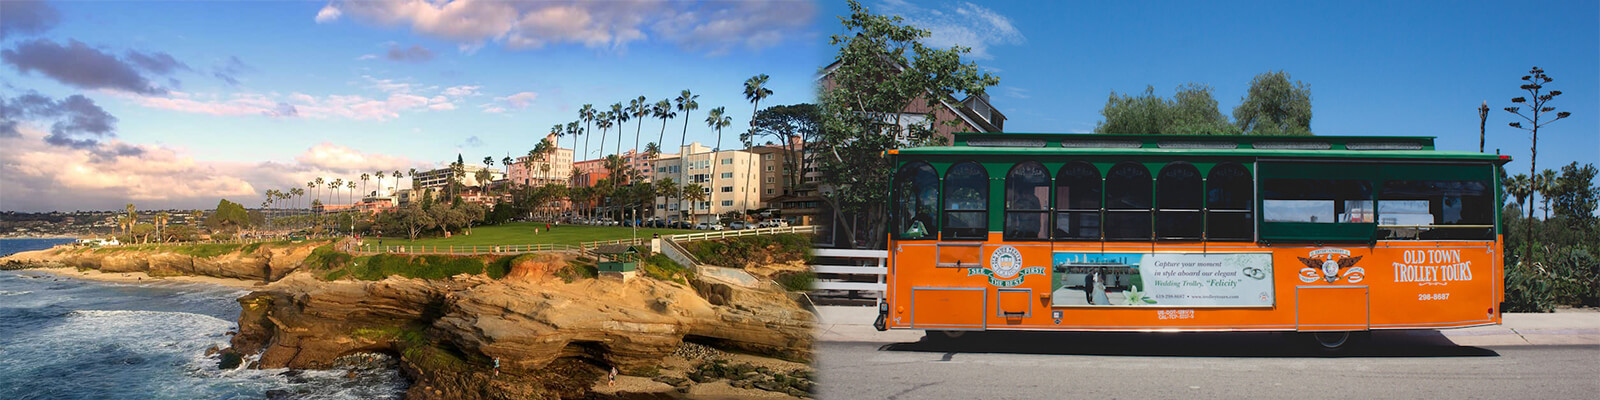 Old Town Trolley La Jolla San Diego Coupons